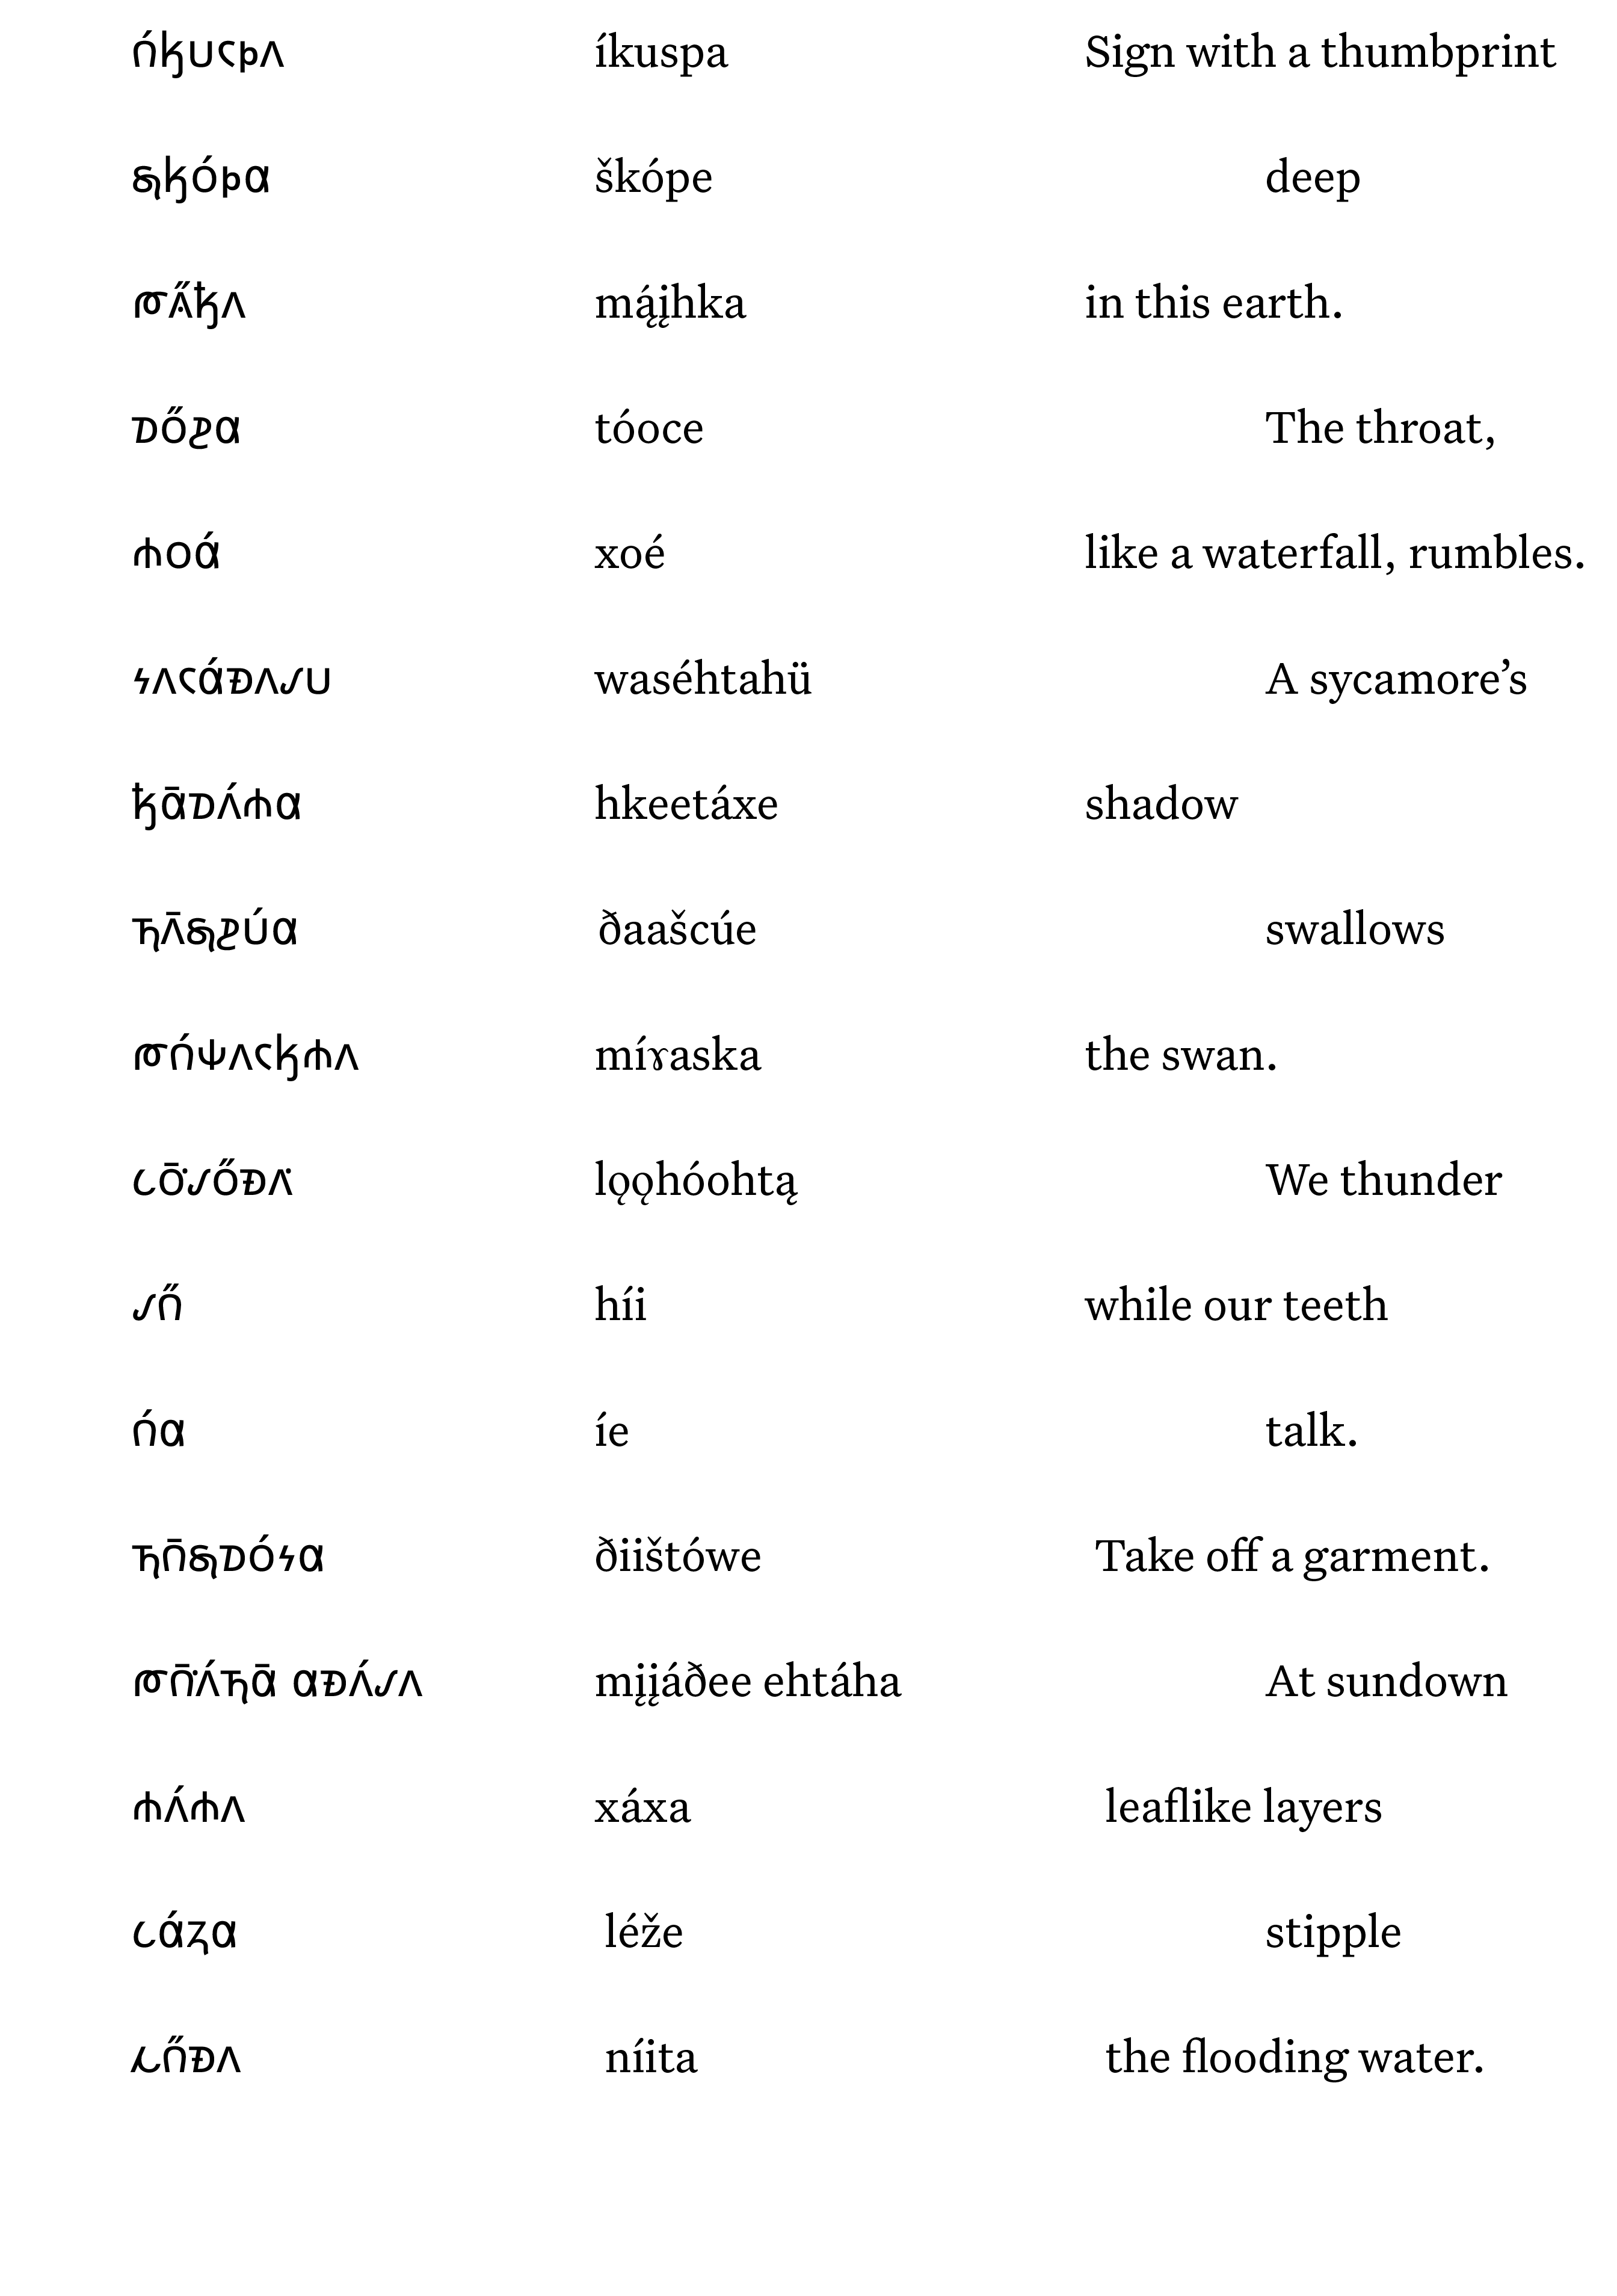 This poem is comprised of three columns: the left contains Osage orthography, the middle is the phonetic spelling, and the right is the English translation.